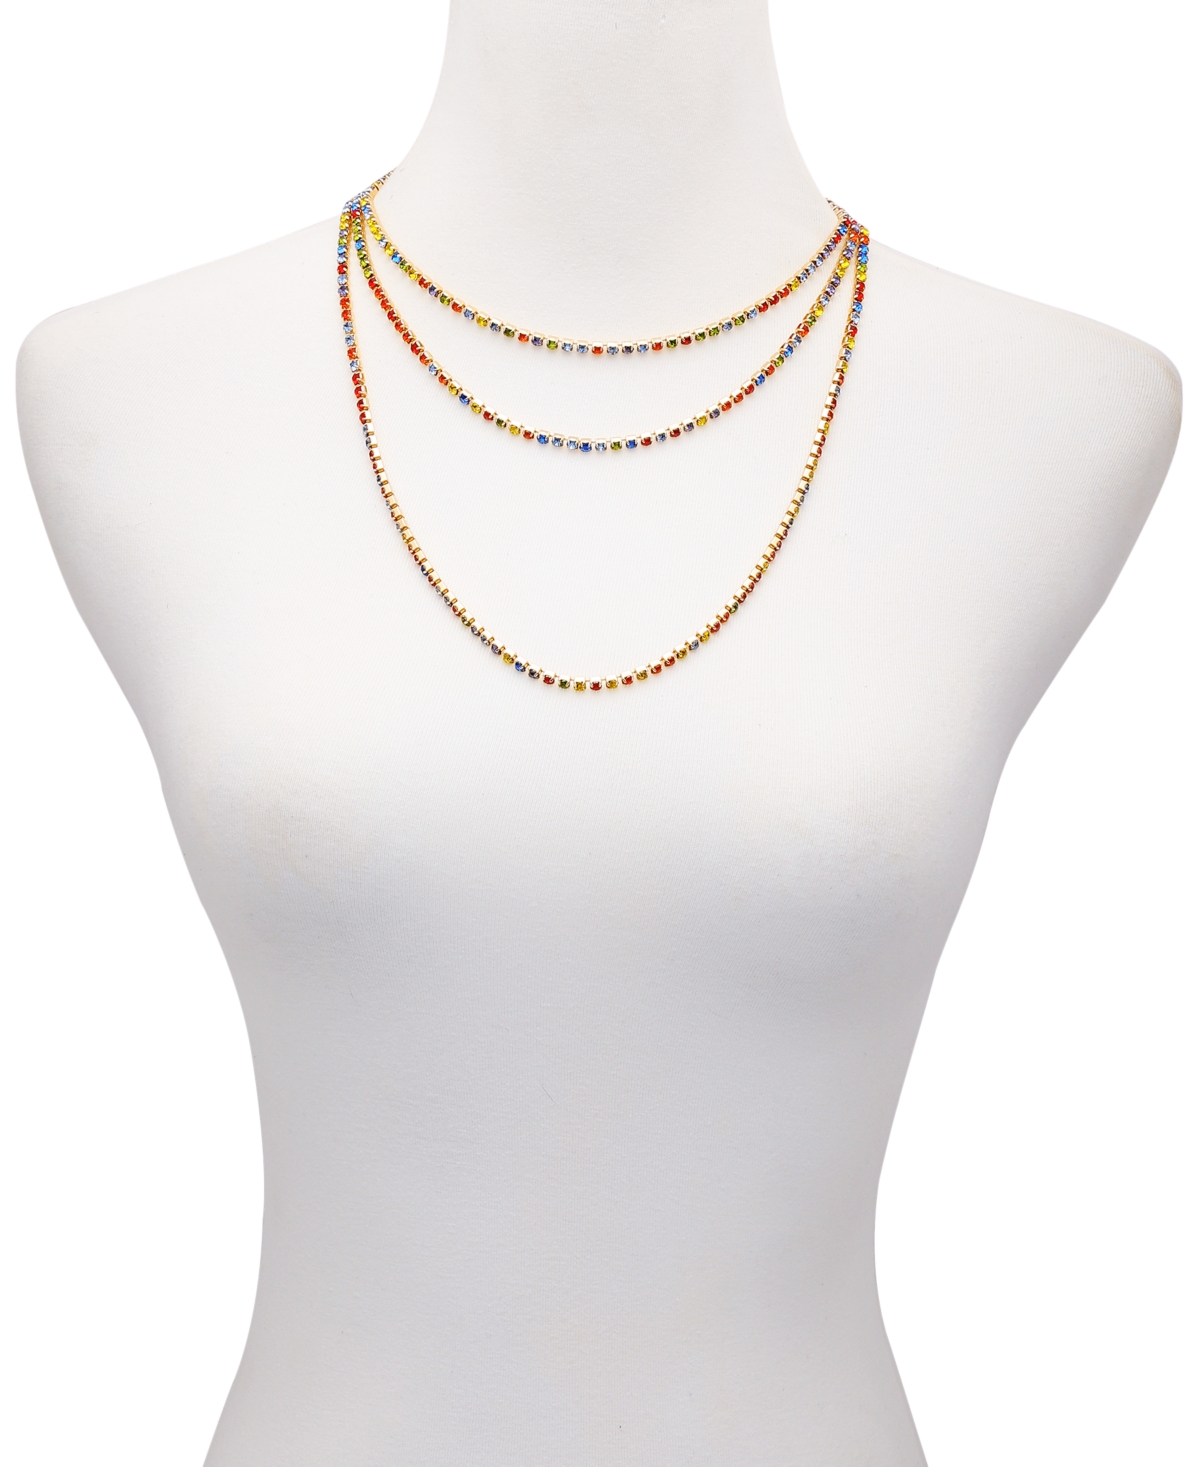 Shop Guess Gold-tone Multicolor Rhinestone Three-row Tennis Necklace, 24" + 2" Extender